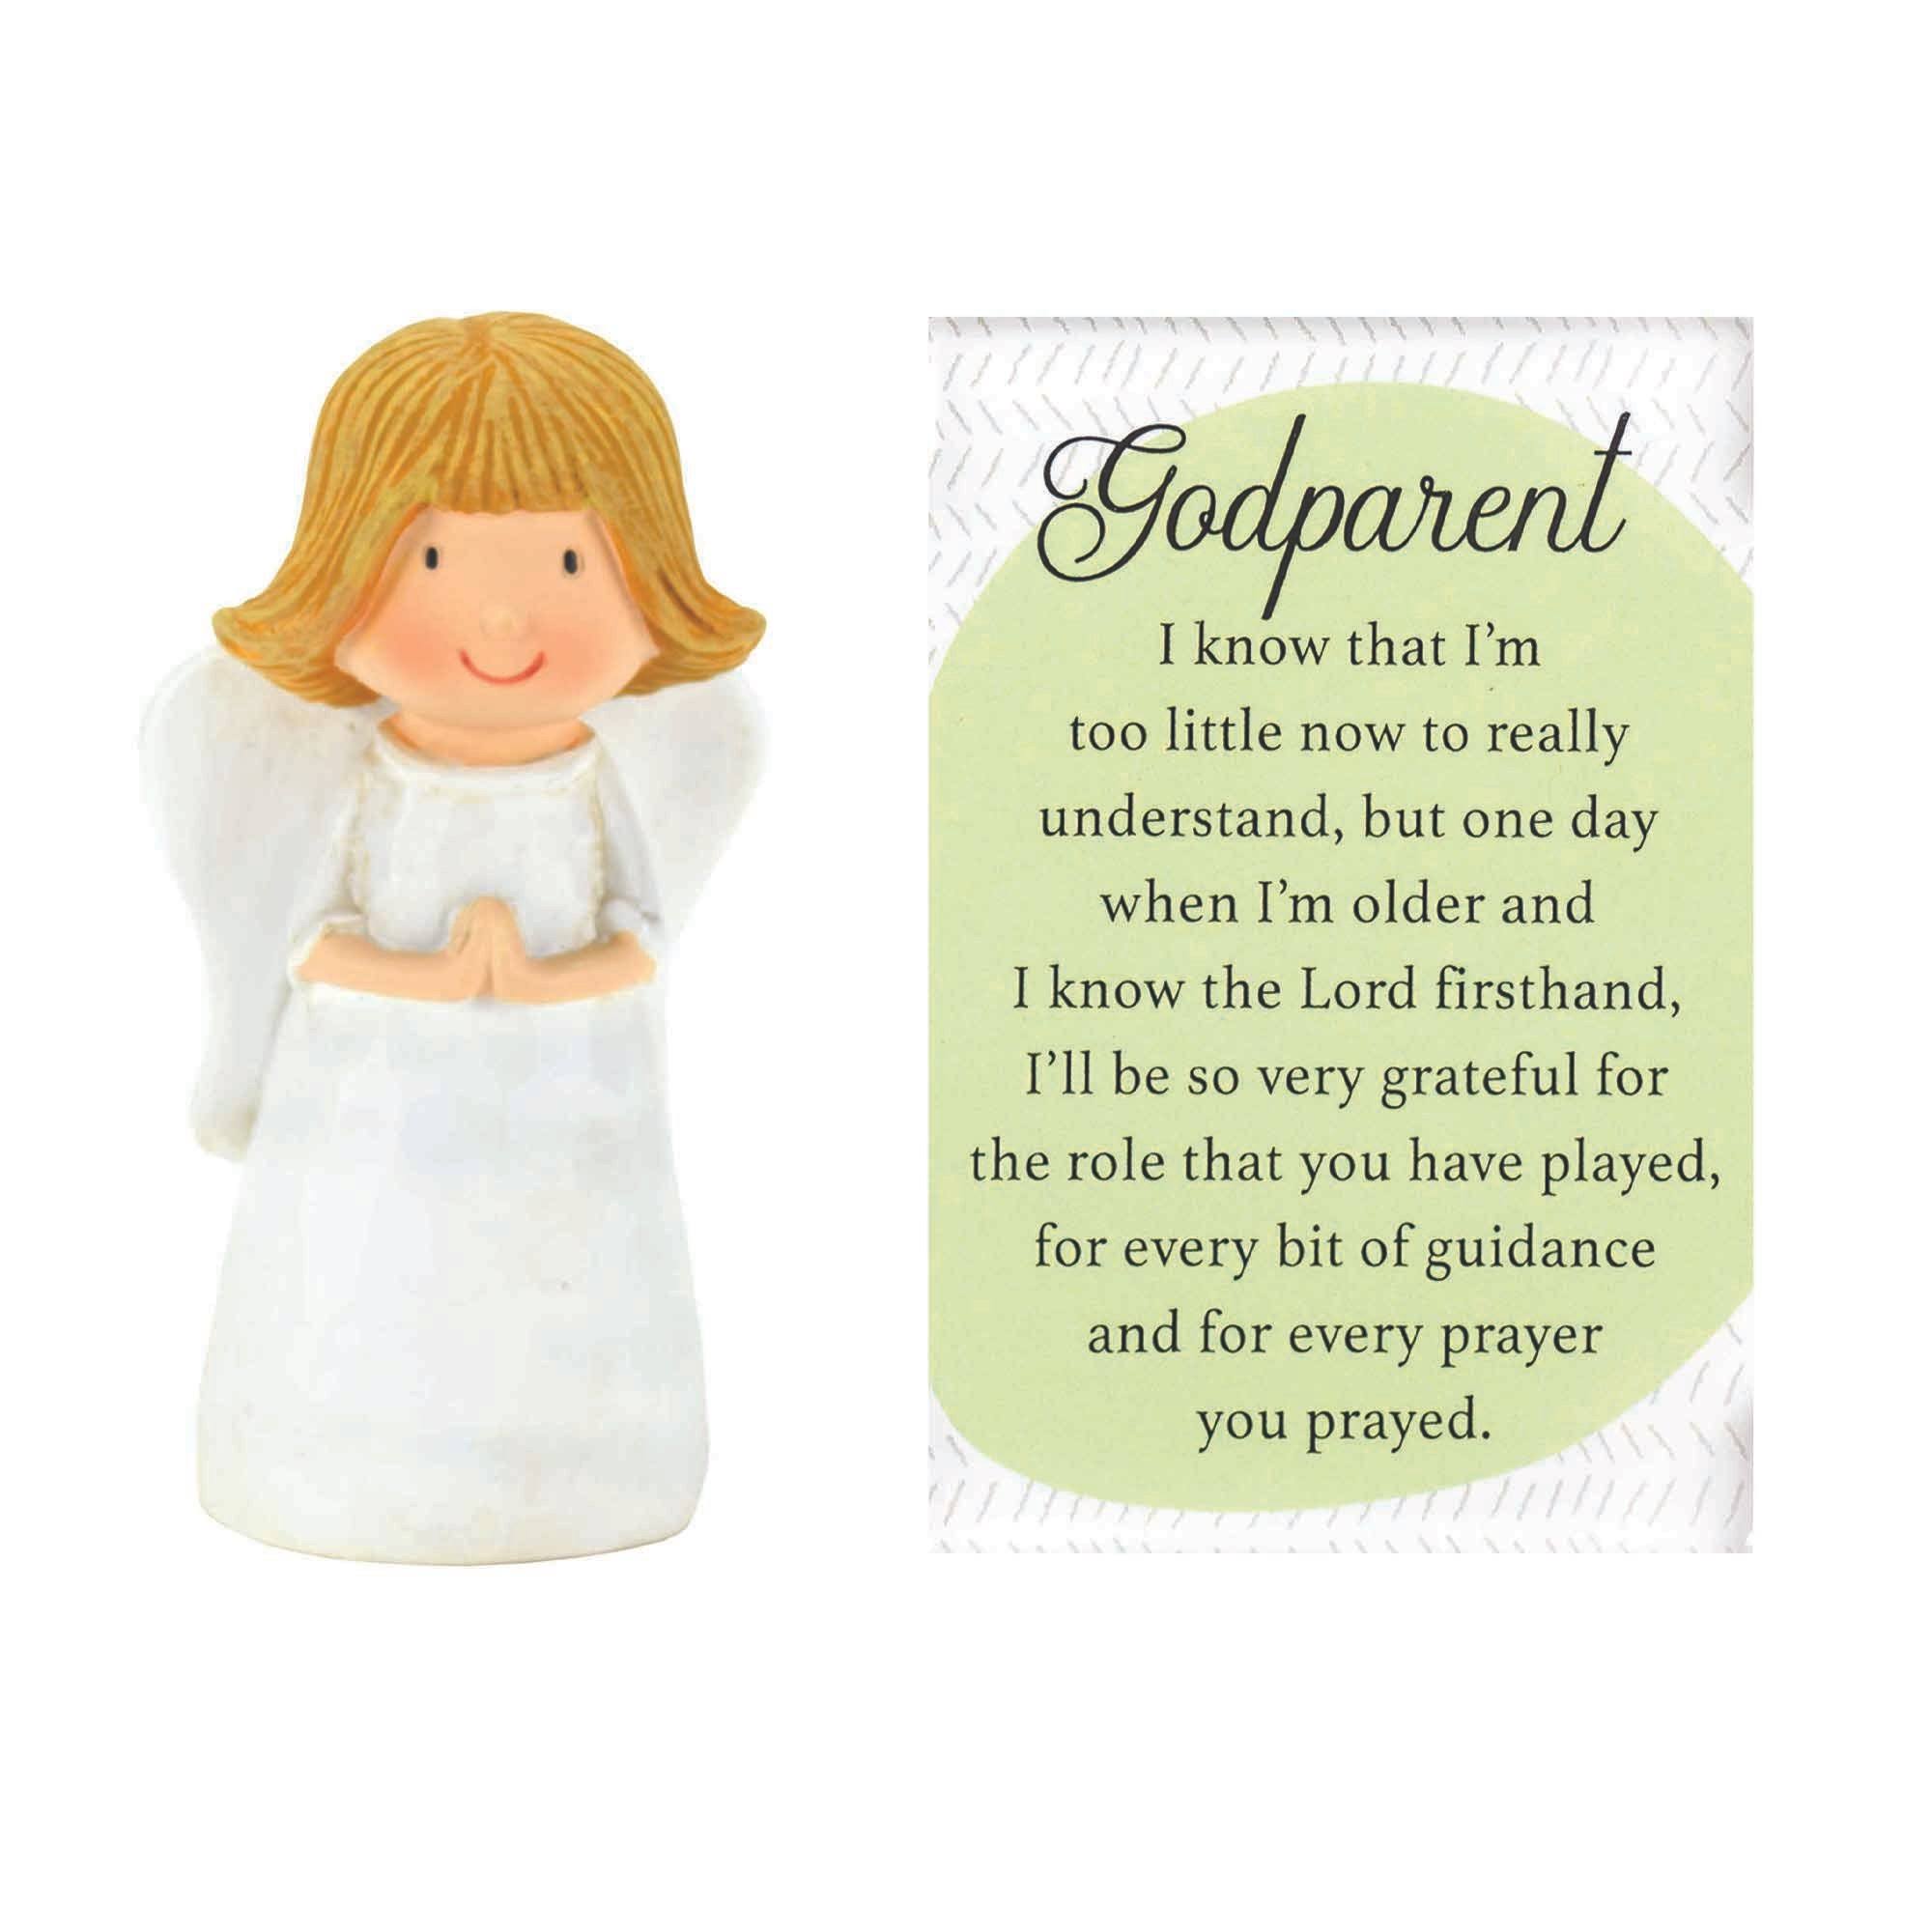 Dicksons Godparent Praying Angel White 3 inch Resin Stone Figurine and Pocket Card